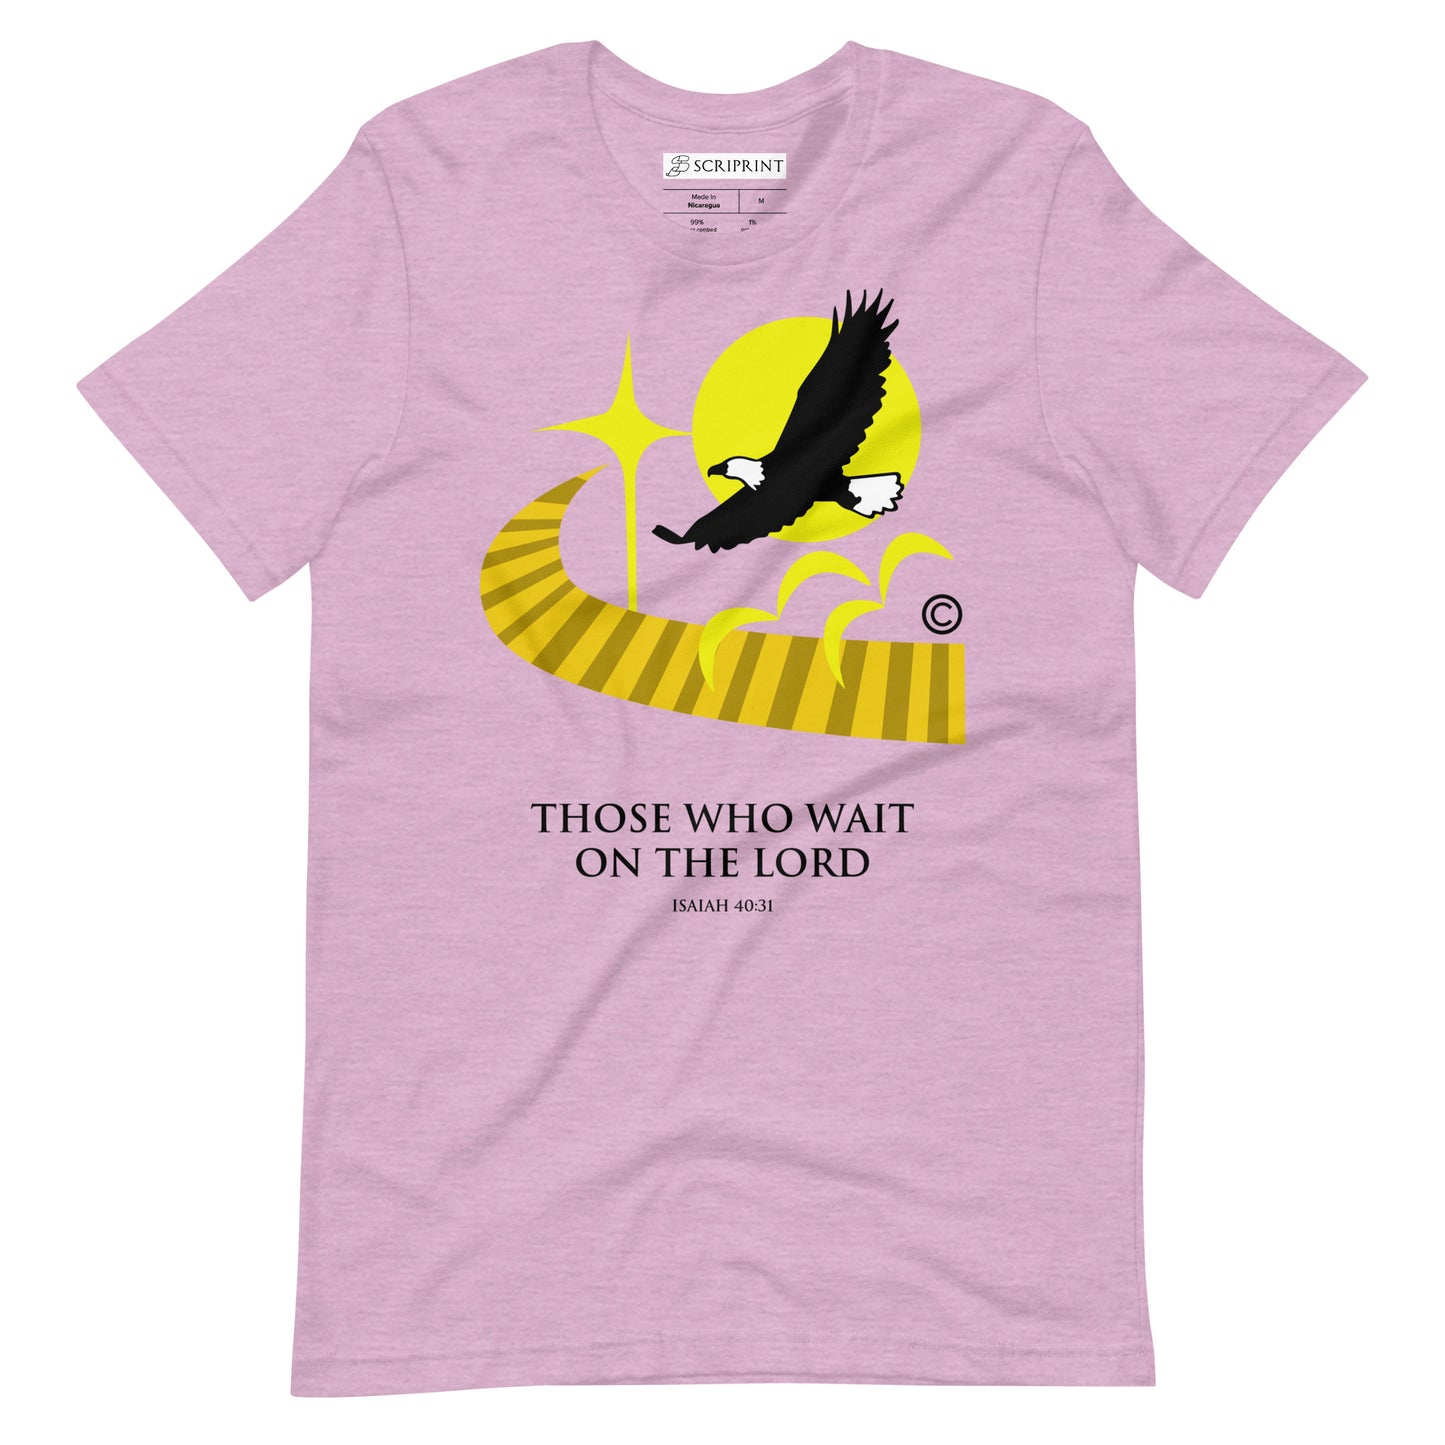 Those Who Wait on the Lord Men's T-Shirt